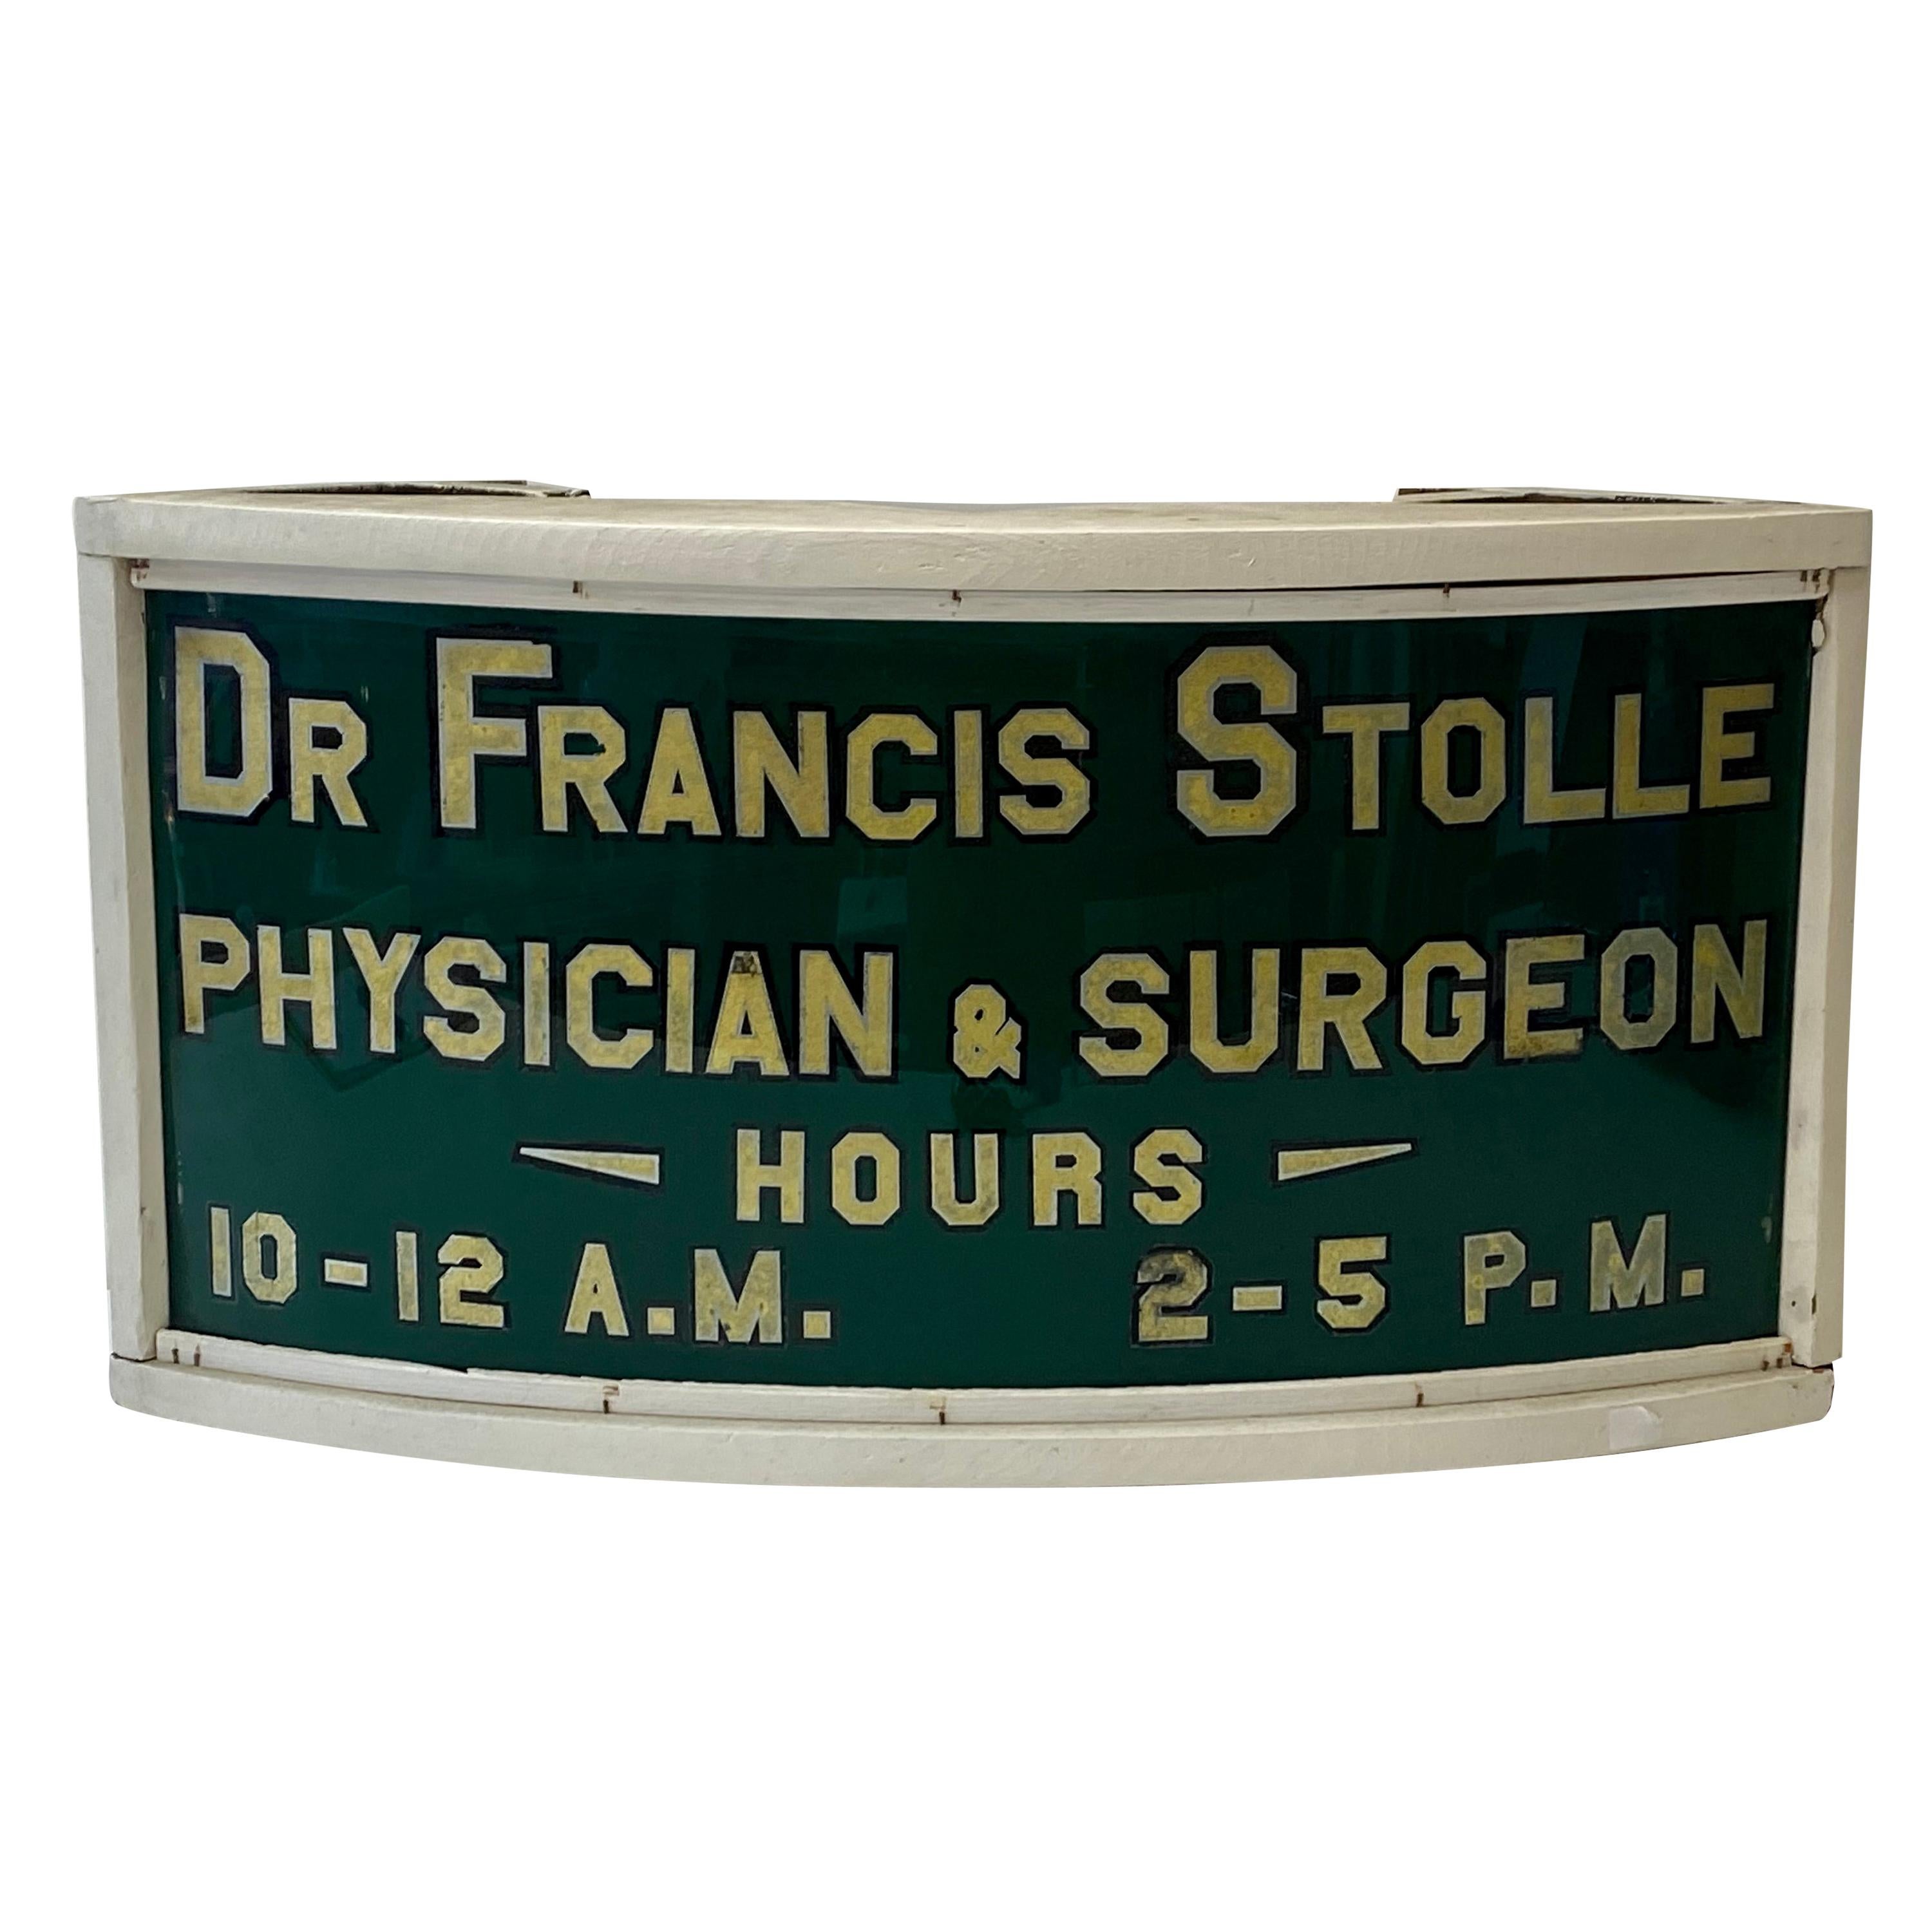 Vintage Doctor's Office "Physician & Surgeon" Sign, C.1920s